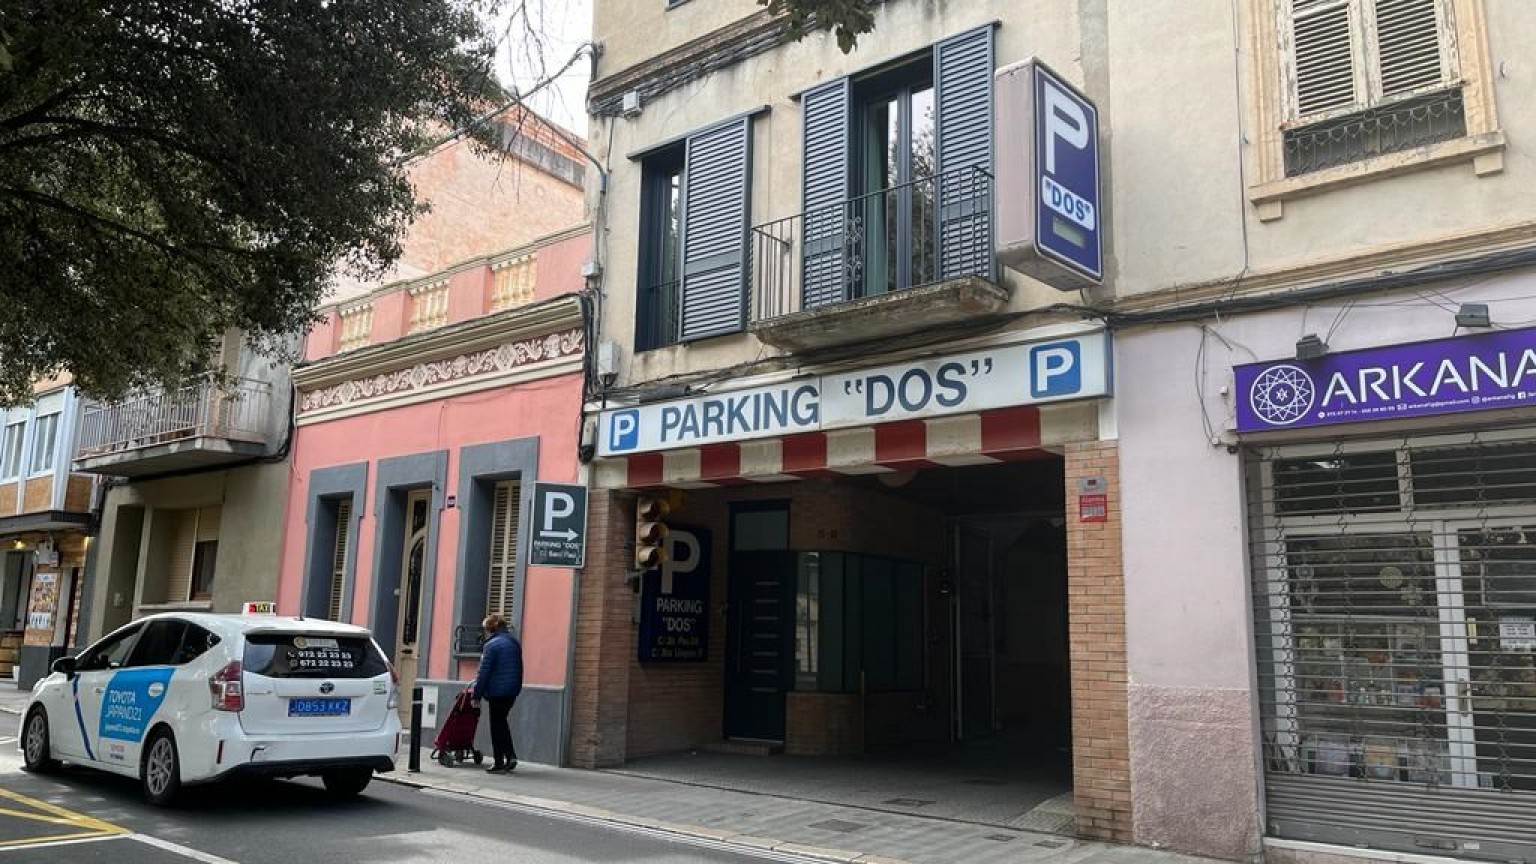 4-storey building for sale, for car parking, in the centre.